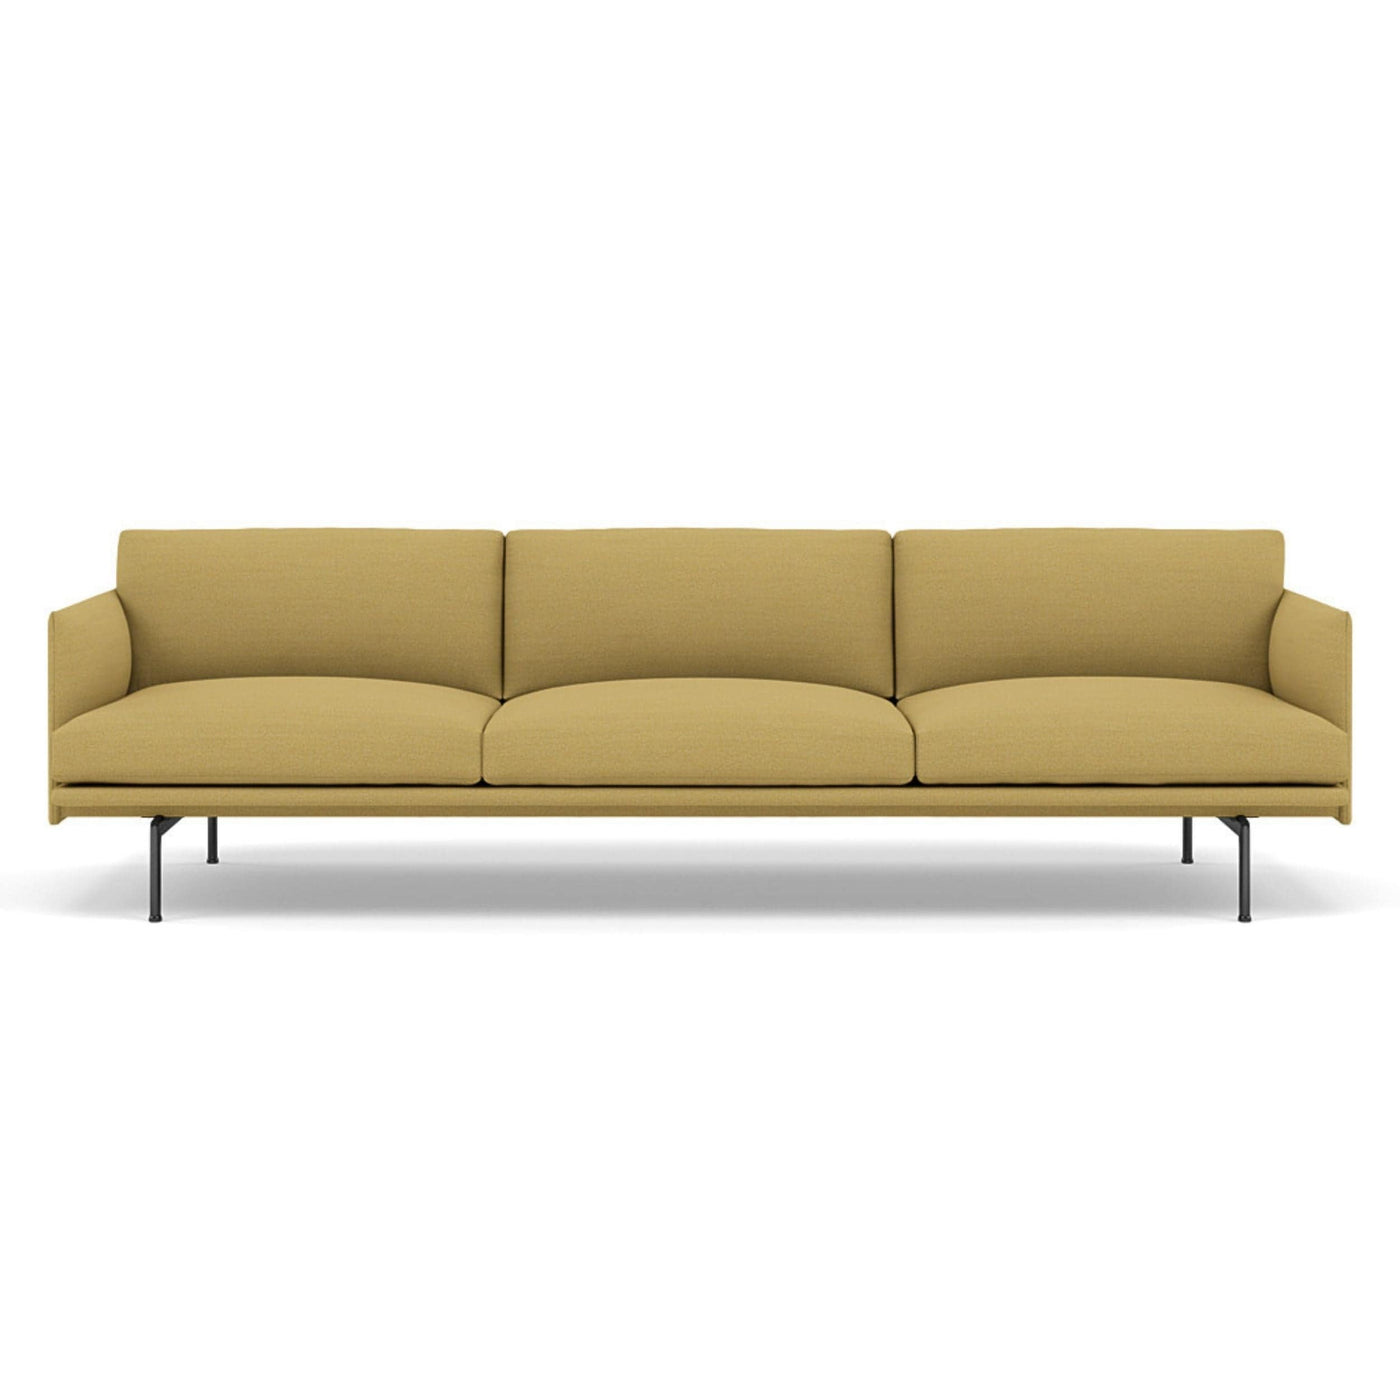 muuto outline 3.5 seater sofa in hallingdal 407 yellow and black legs. Made to order from someday designs. #colour_hallingdal-407